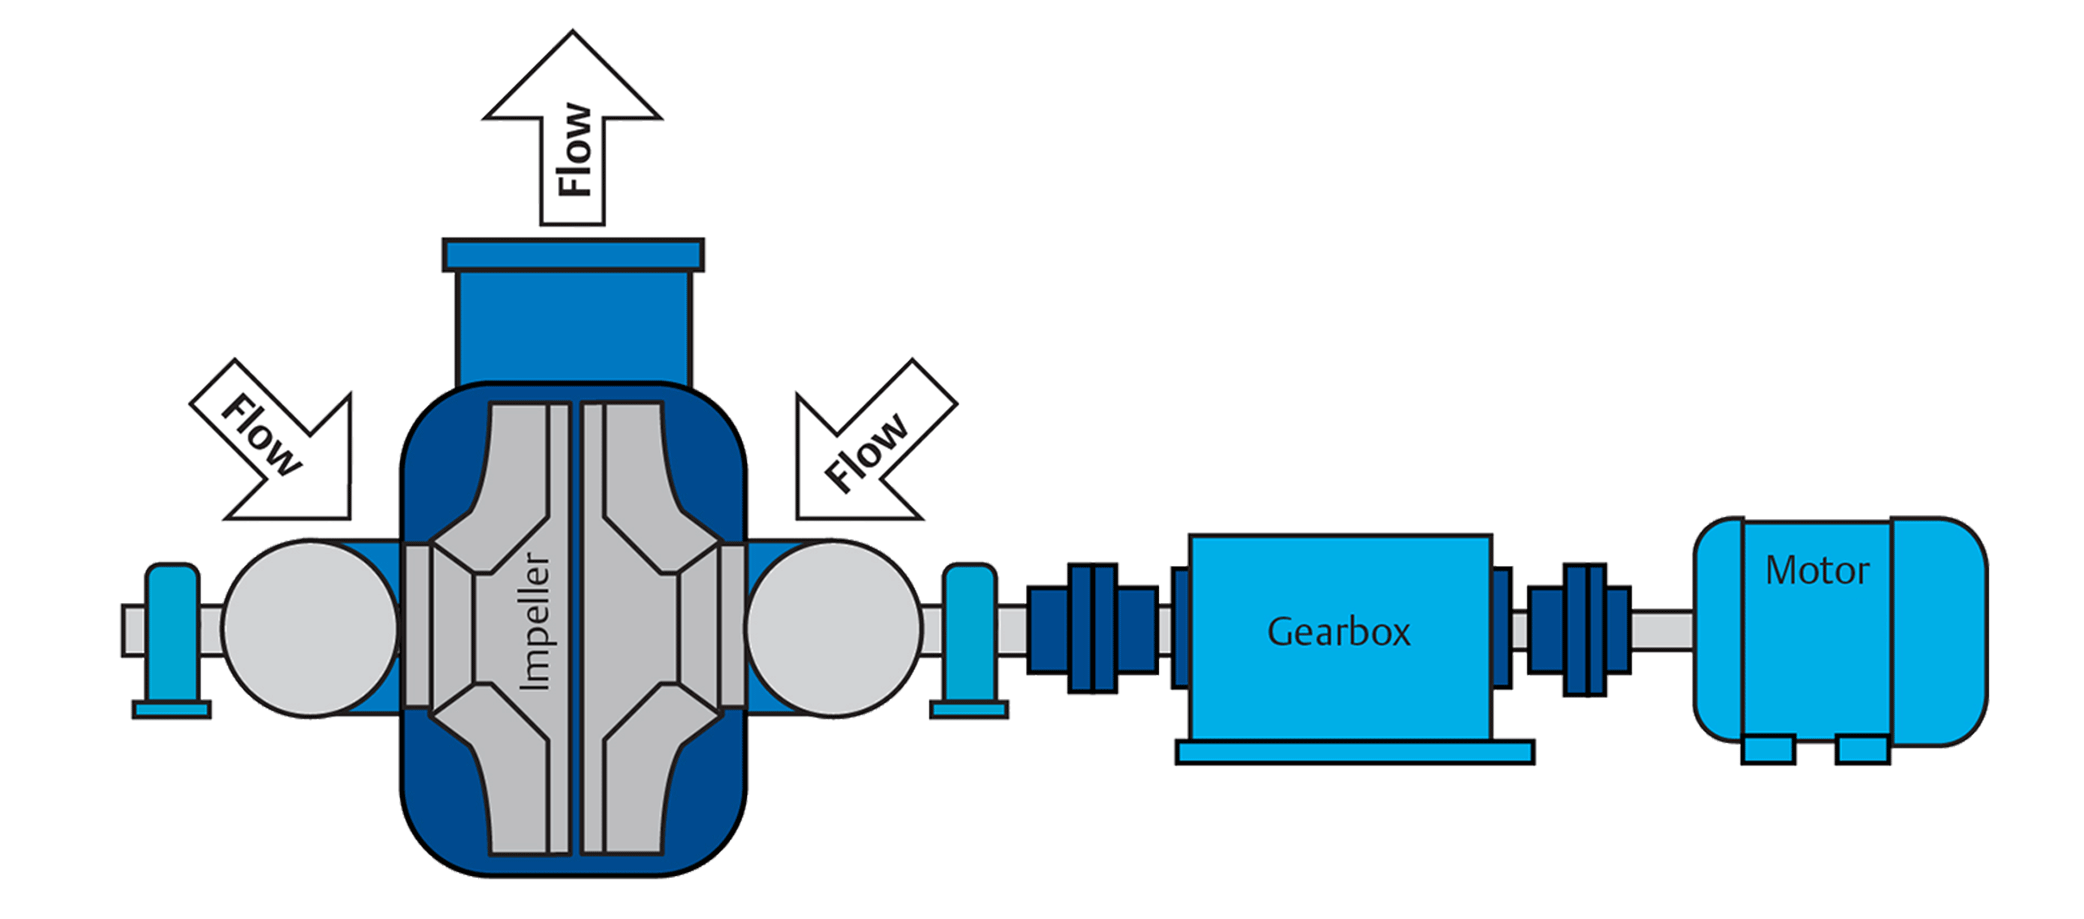 Pump with Gearbox & Motor